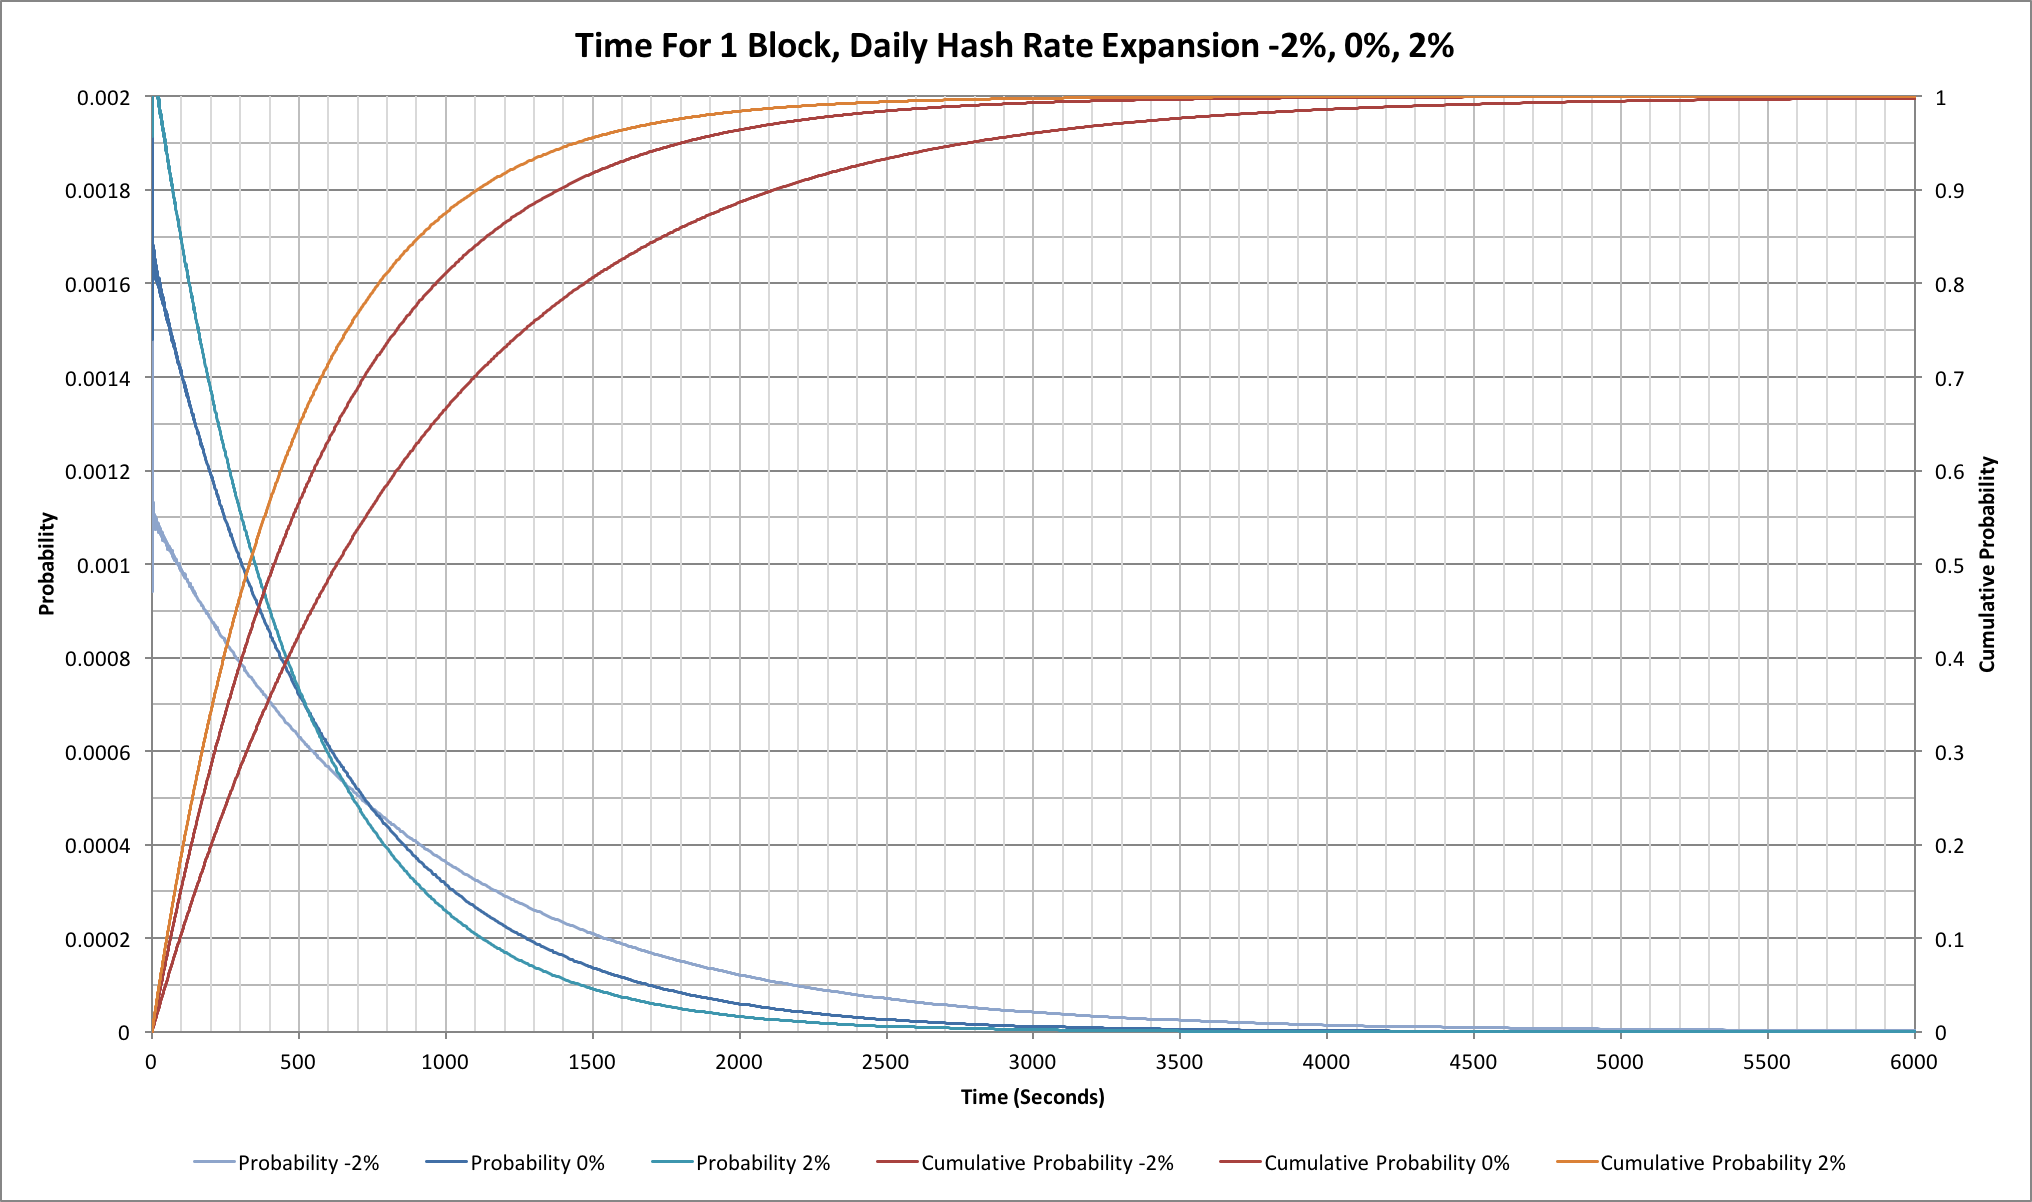 Probabilities of finding a single Bitcoin block under -2%, 0% and +2% daily hash rate changes